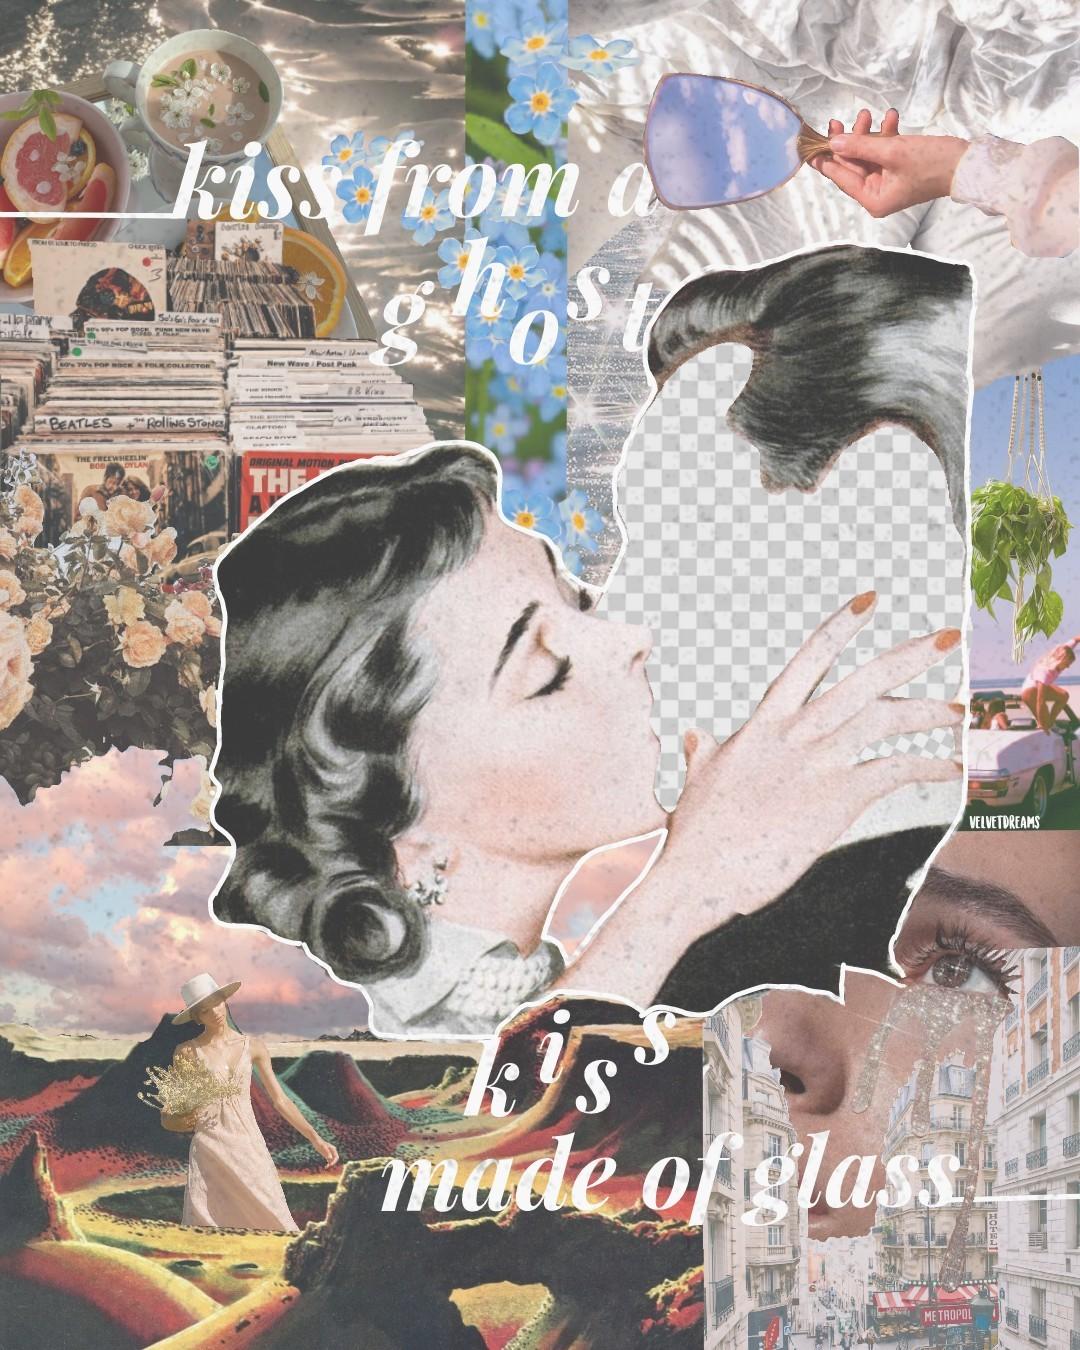 this took so long!! all made using piccollage 🕊☁️ + inspired by the amazing @undeadjuliet & an artist i found on insta (@takiisbranding) ✨ i love the vintage vibes here, let me know what u think and remix to see all the elements if u want! ❤